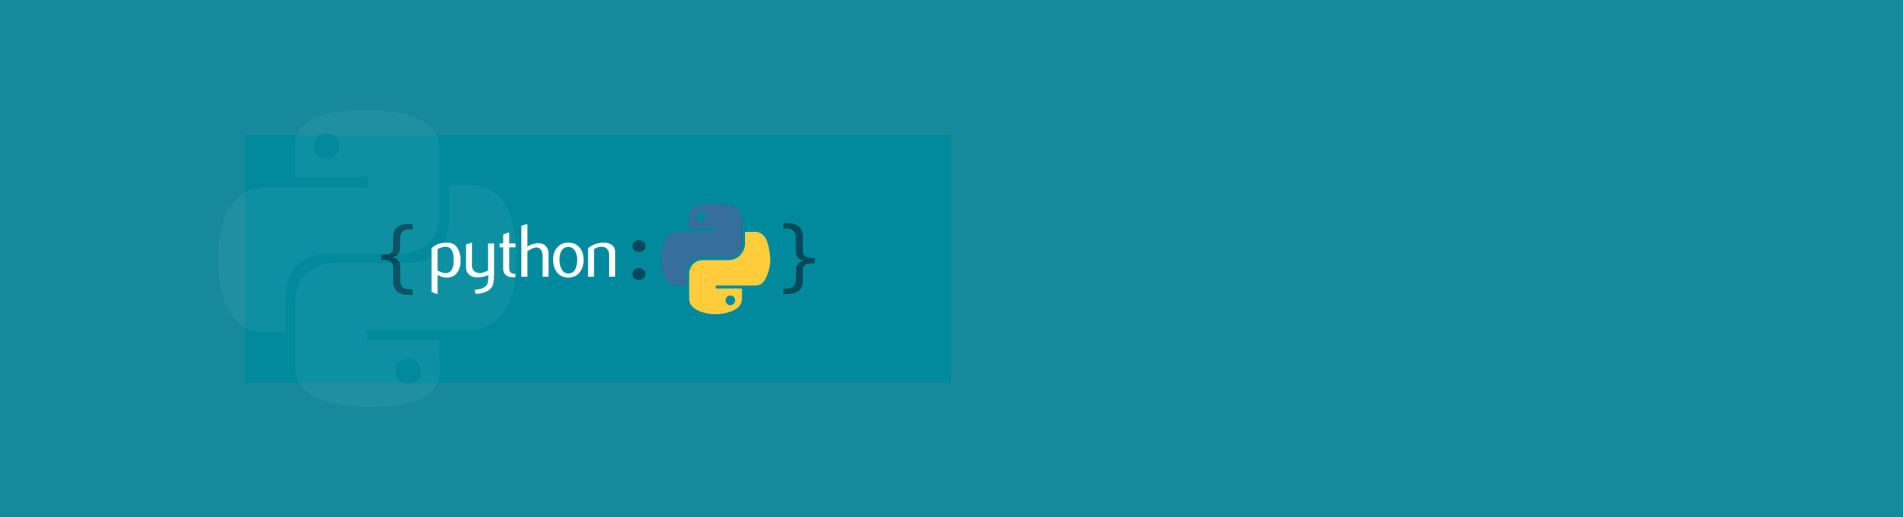 Top-Notch Python Development Services to Boost Your Project